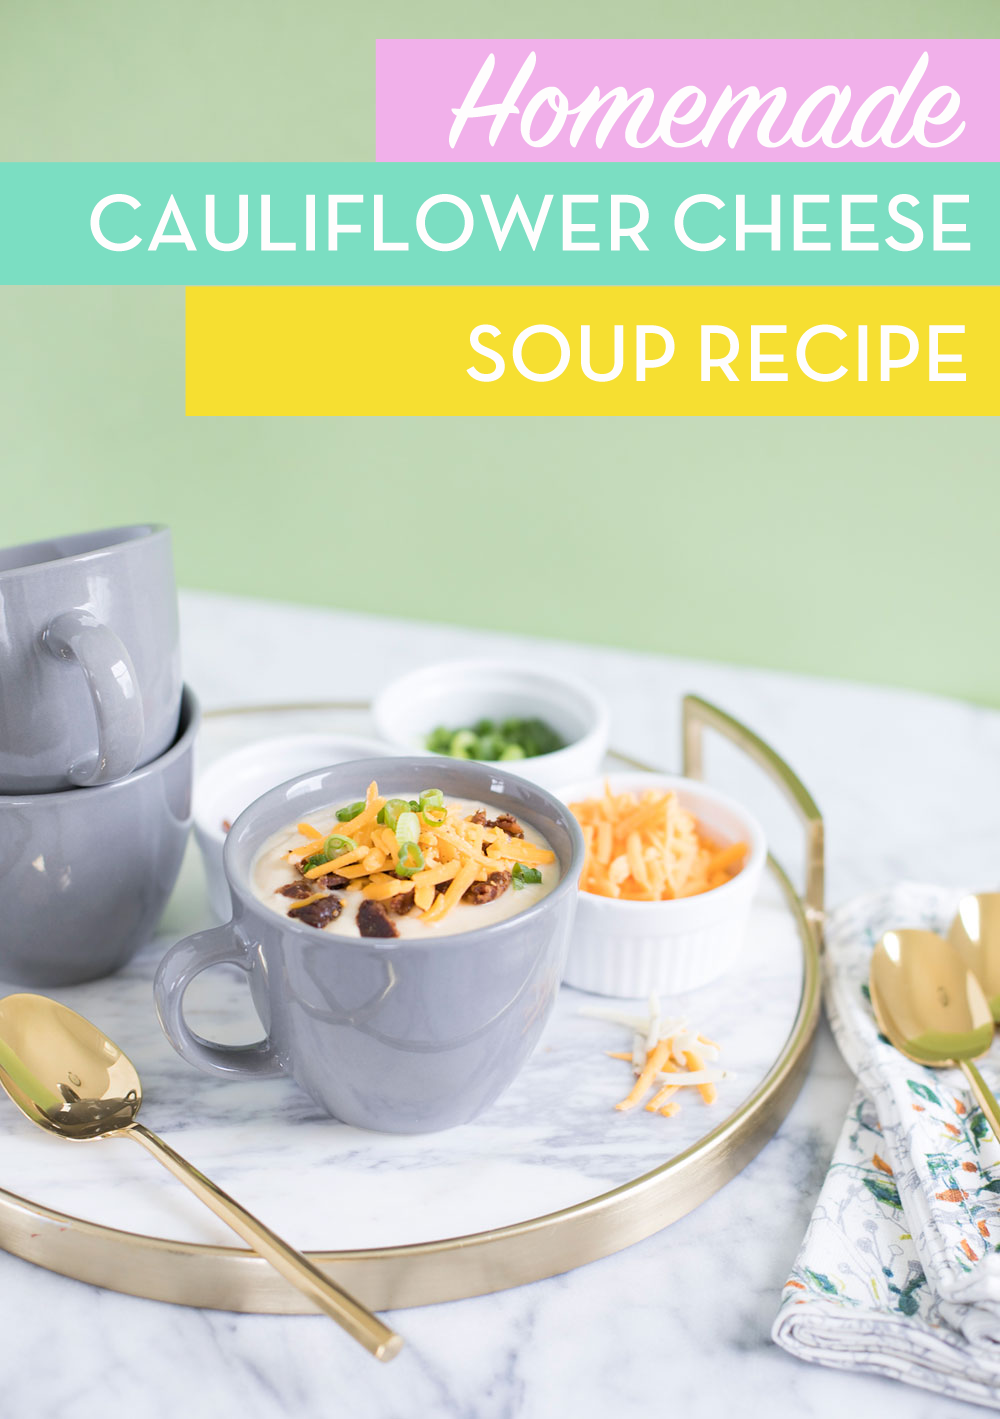 Cauliflower Cheese Soup Recipe with Shredded Sargento Cheese Toppings